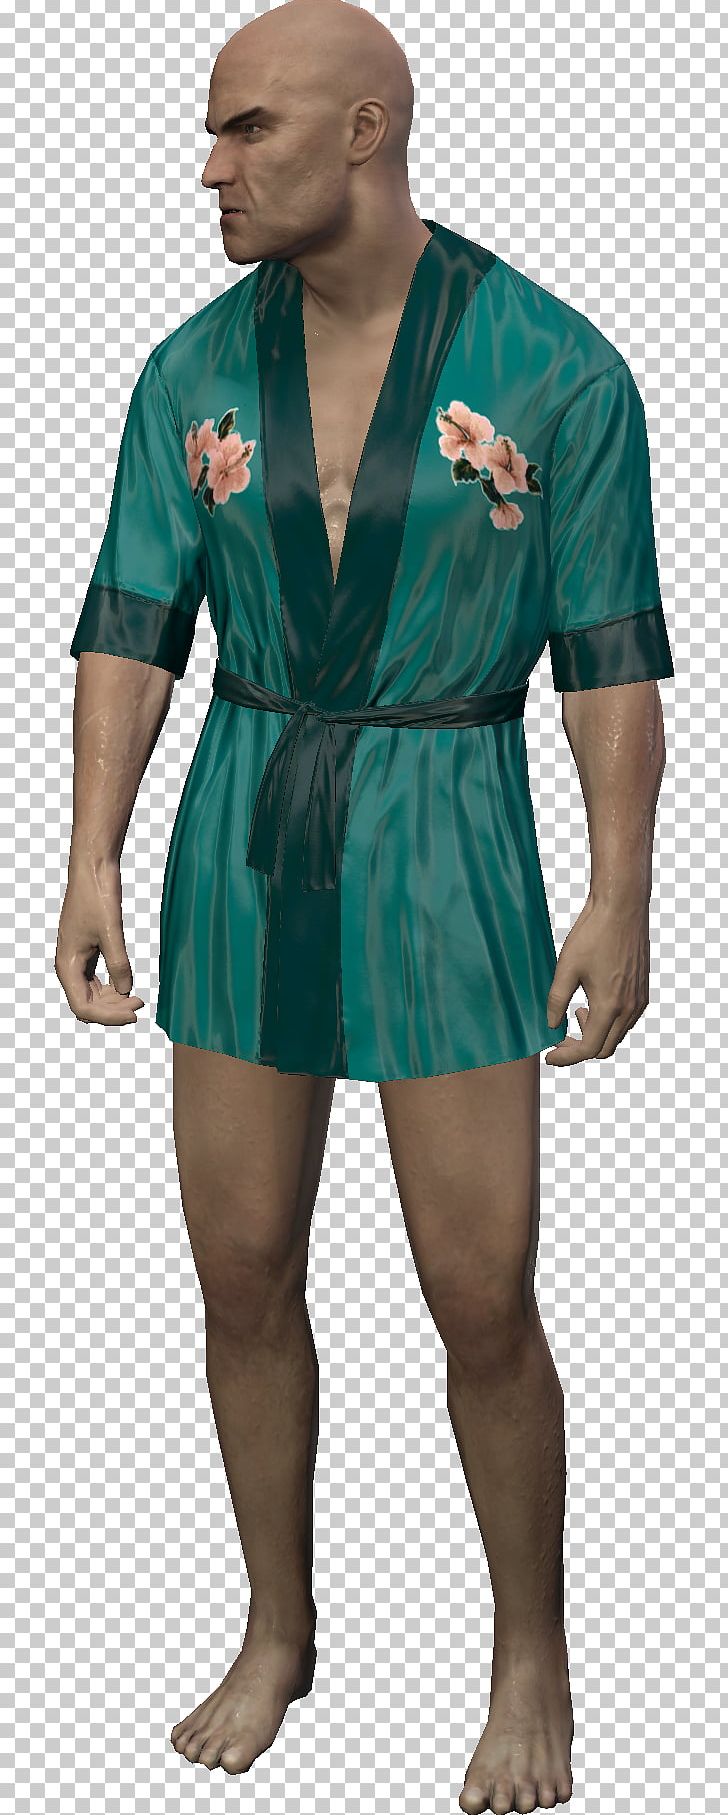 Hitman: Absolution Agent 47 Robe Clothing PNG, Clipart, Agent 47, Bathrobe, Clothing, Costume, Dress Free PNG Download